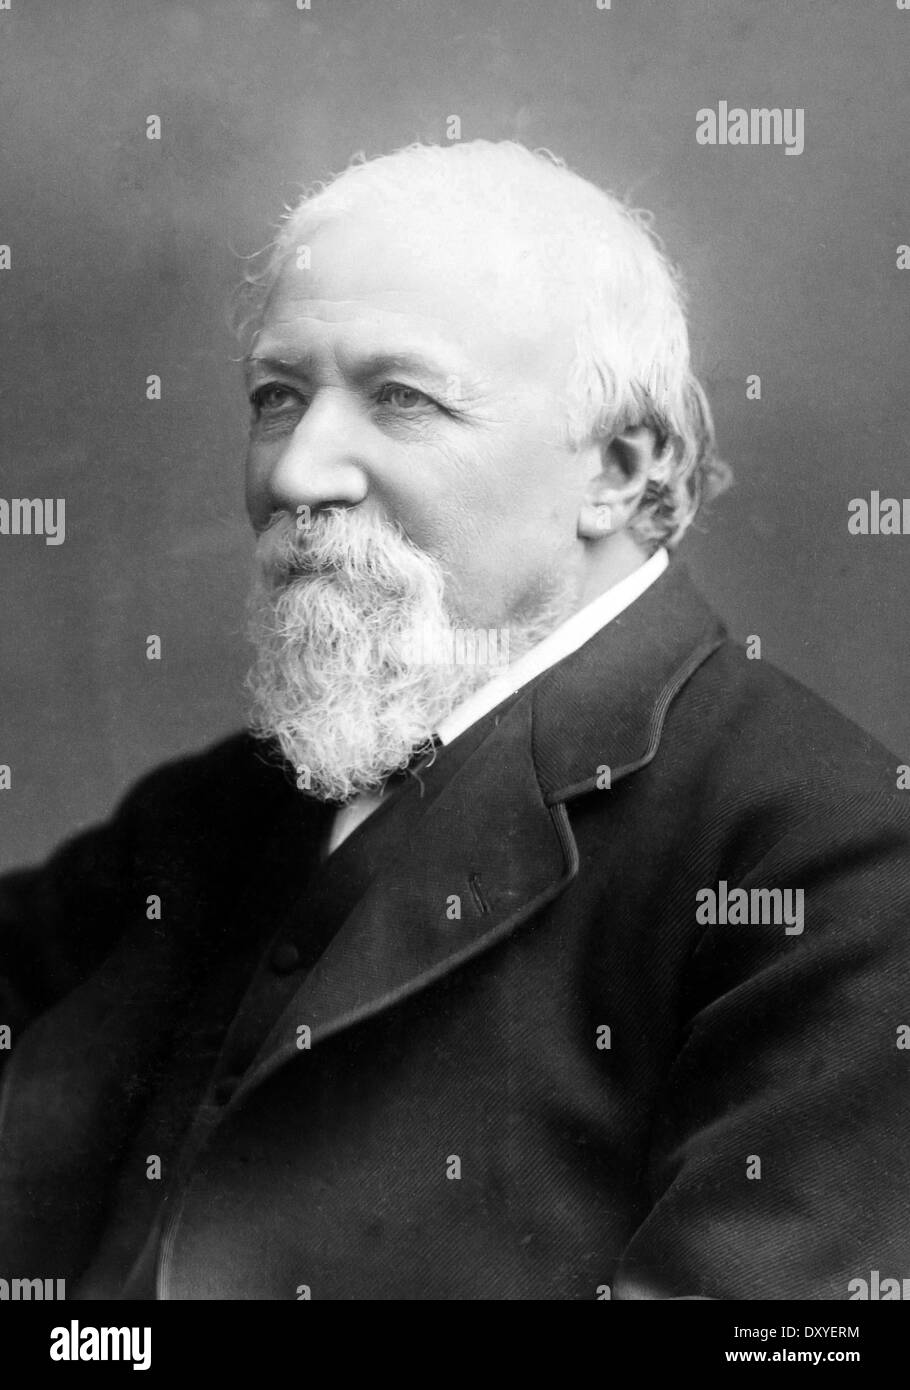 ROBERT BROWNING (1812-1889) English poet and playwright about 1888 Stock Photo